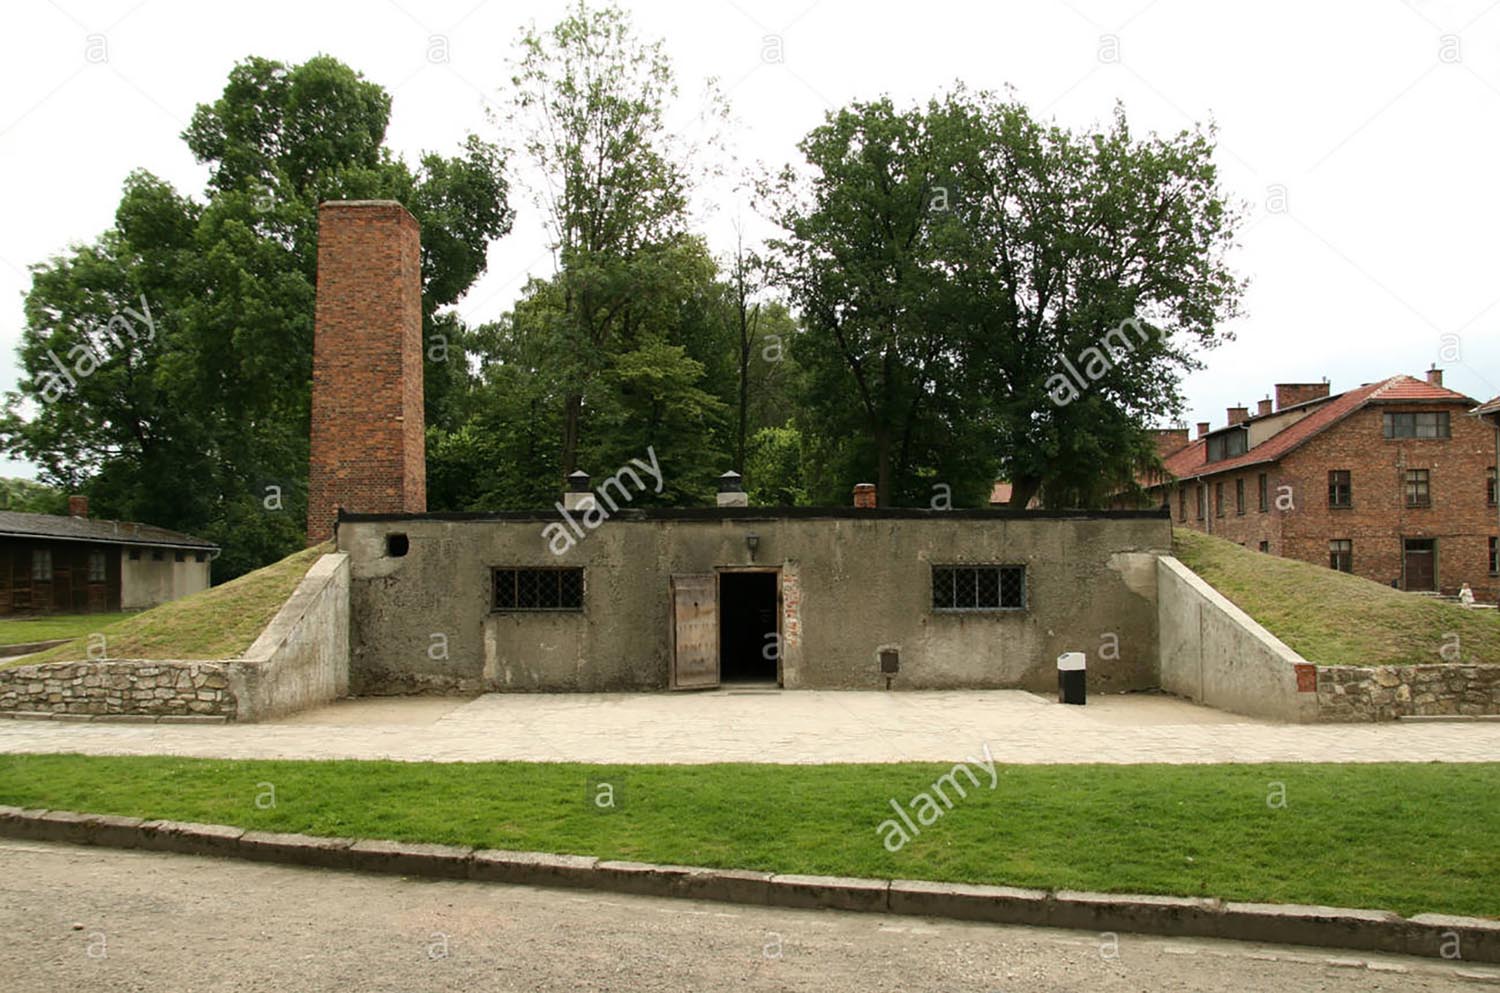 the-main-entrance-and-chimney-of-the-gas-chamber-and-crematorium-i-ayjkgw